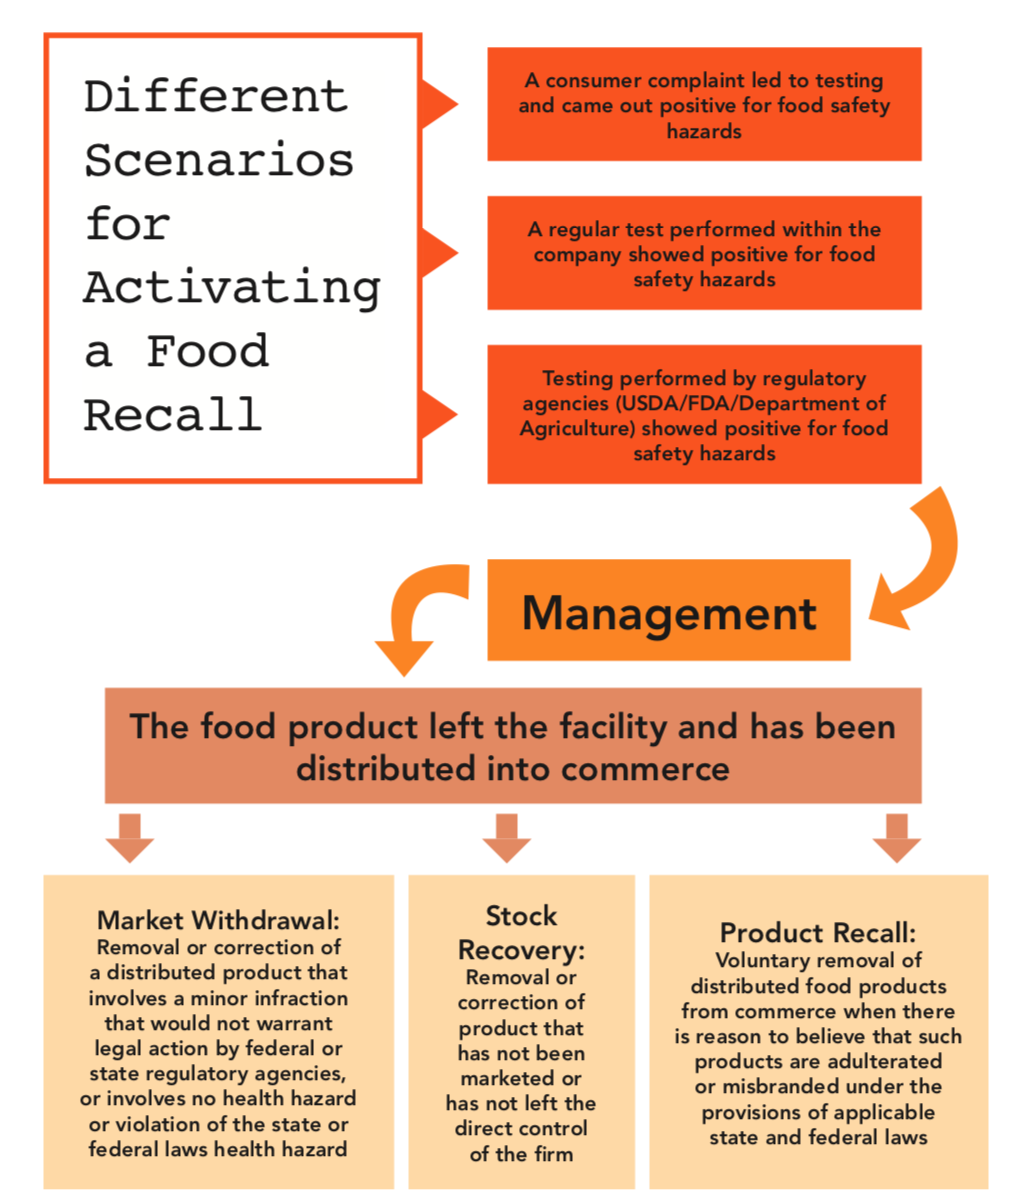 What is a Product Recall? Quality Recall Process